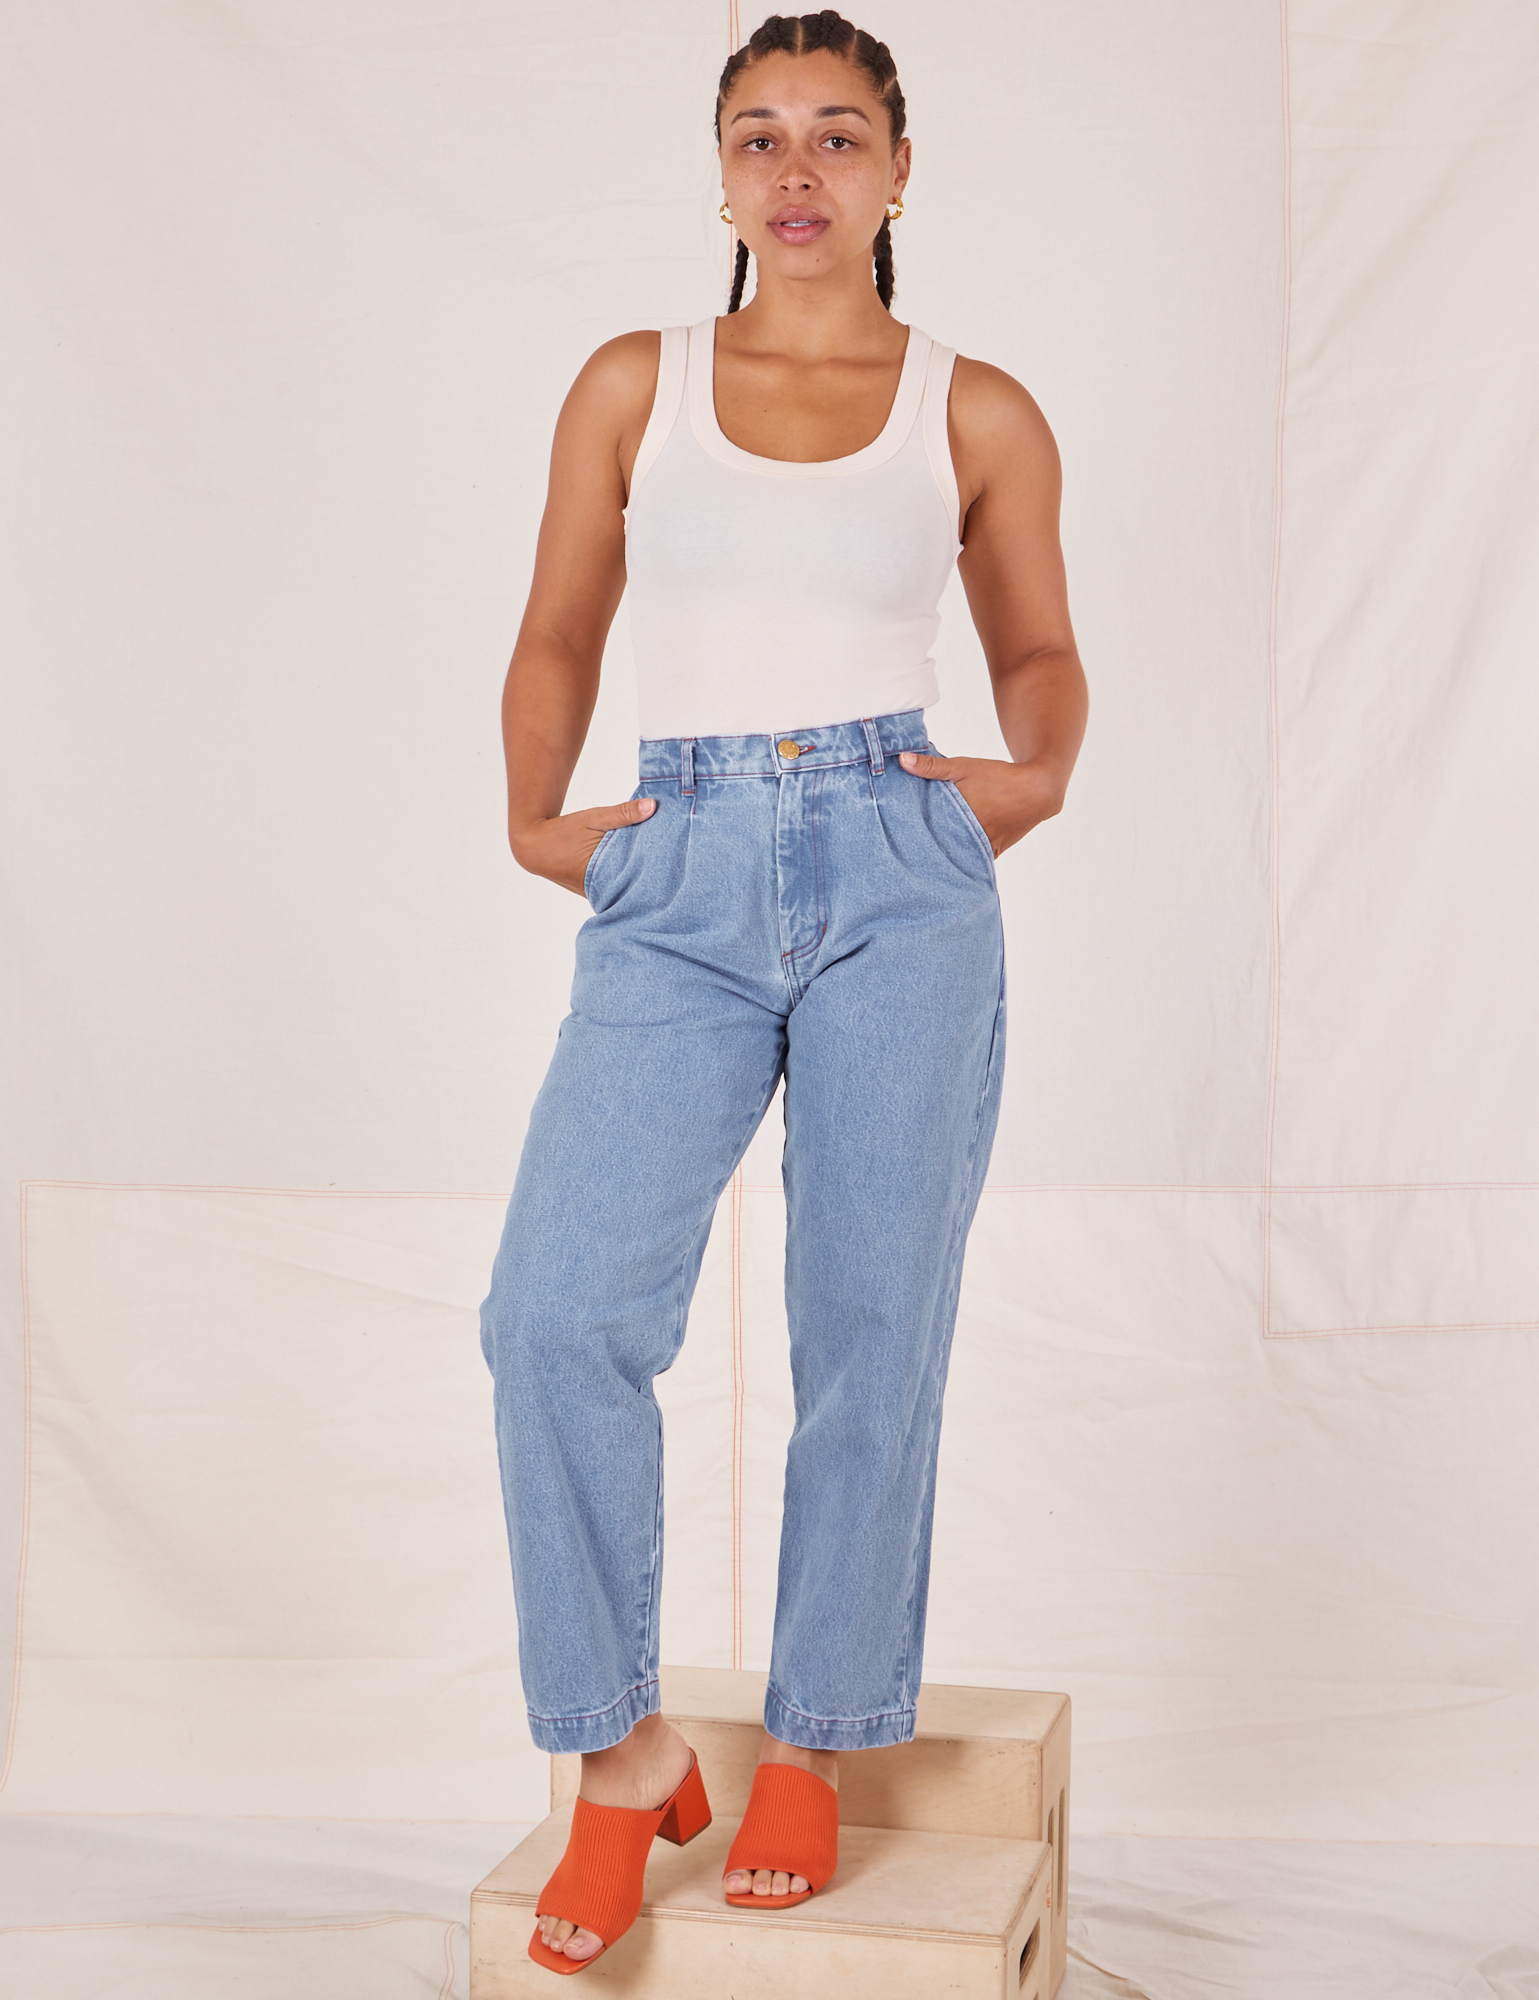 Gabi is 5&#39;7&quot; and wearing XXS Denim Trouser Jeans in Light Wash paired with vintage off-white Tank Top